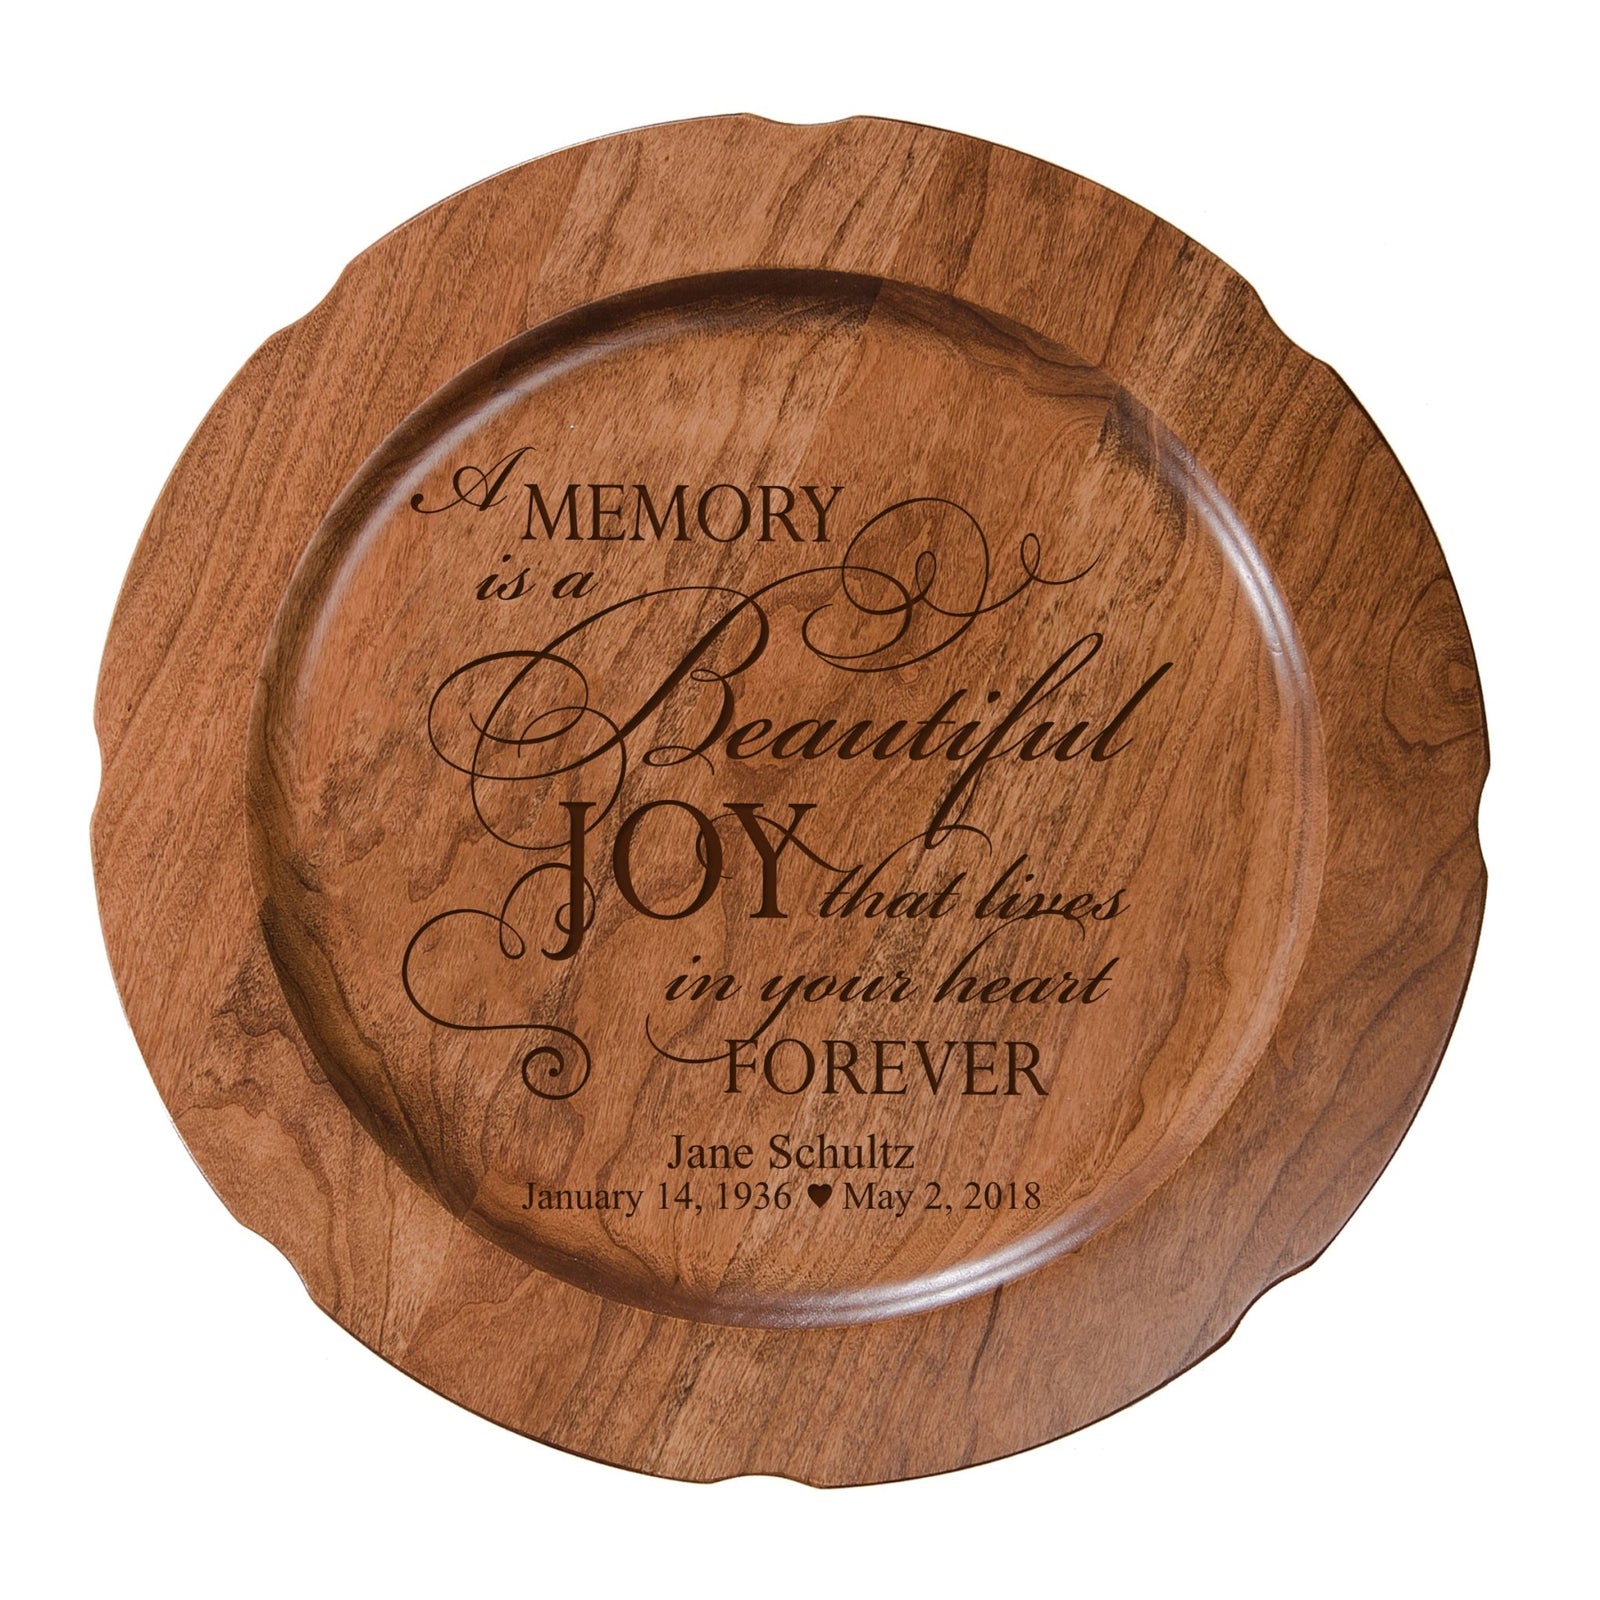 12" Personalized Memorial Wooden Plate - A Memory - LifeSong Milestones